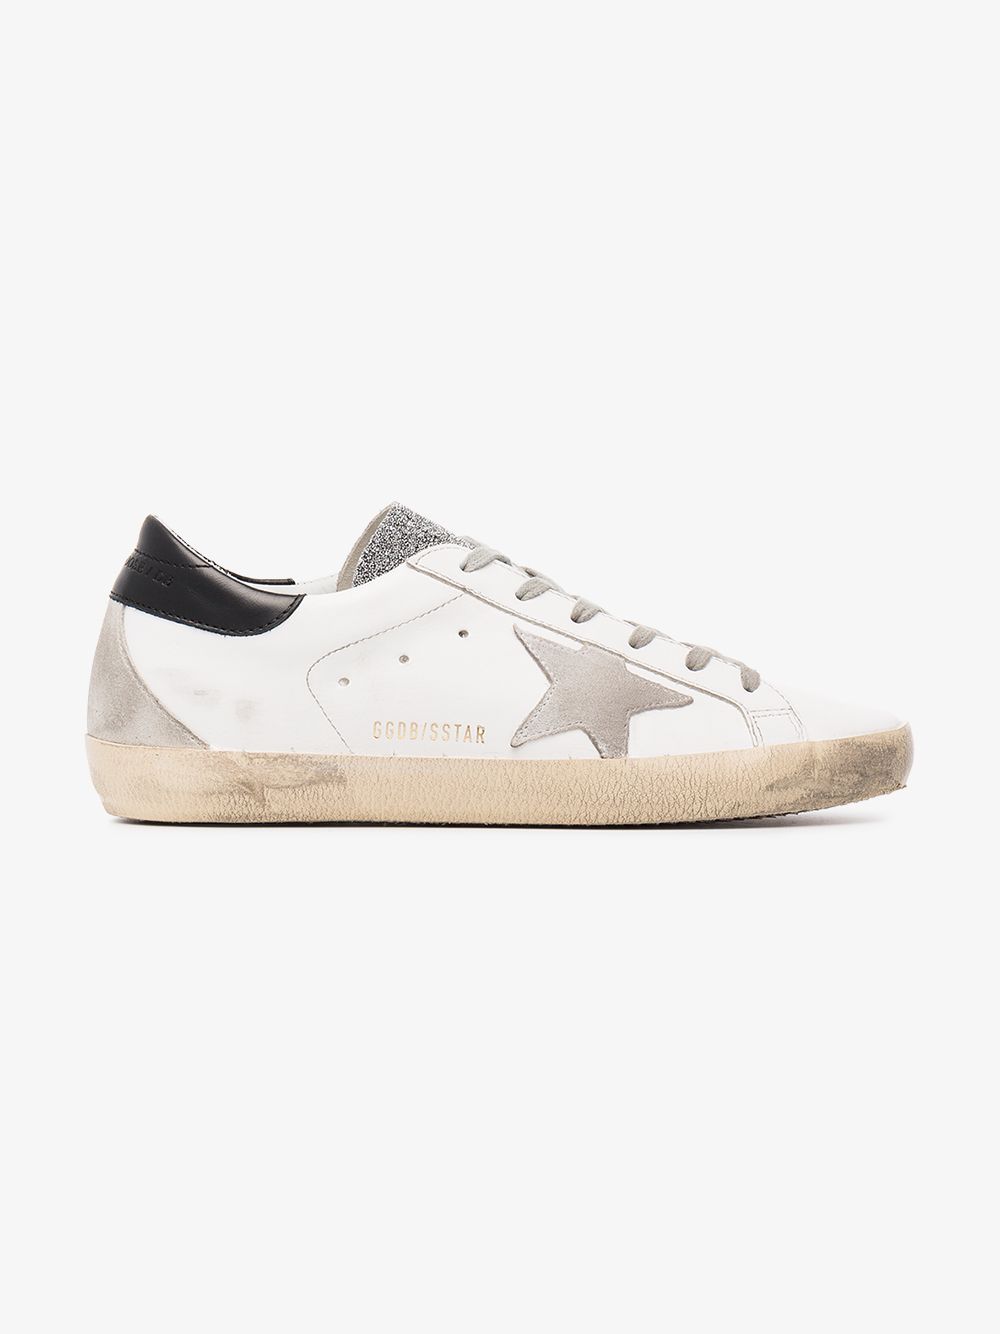 Golden Goose Deluxe Brand white grey glitter Superstar sneakers | Browns Fashion